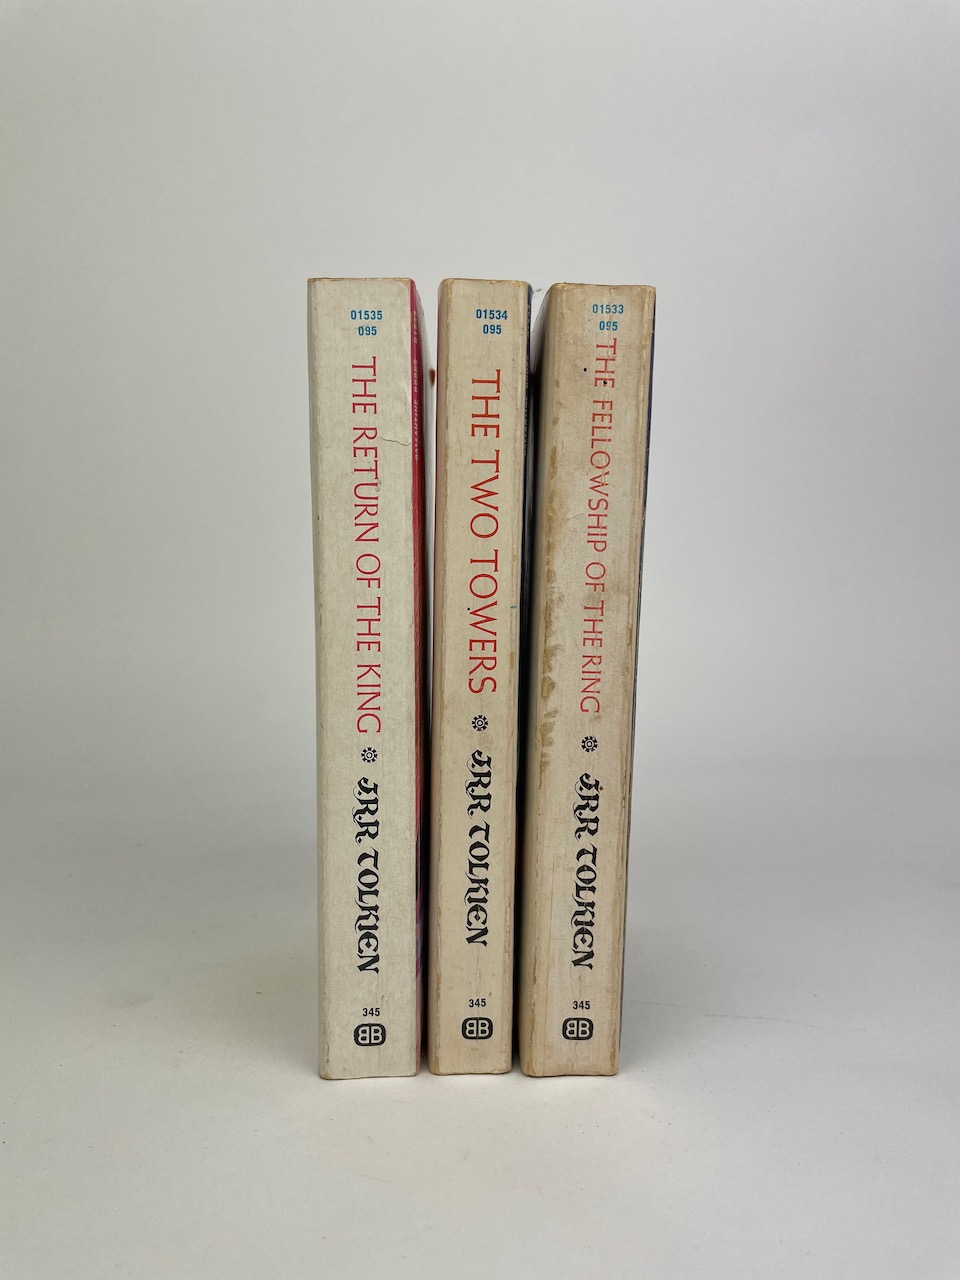 The Lord of the Rings, Paperback Book Boxset from 1969, 3 volumes in Barabara Remmington Slipcase 8